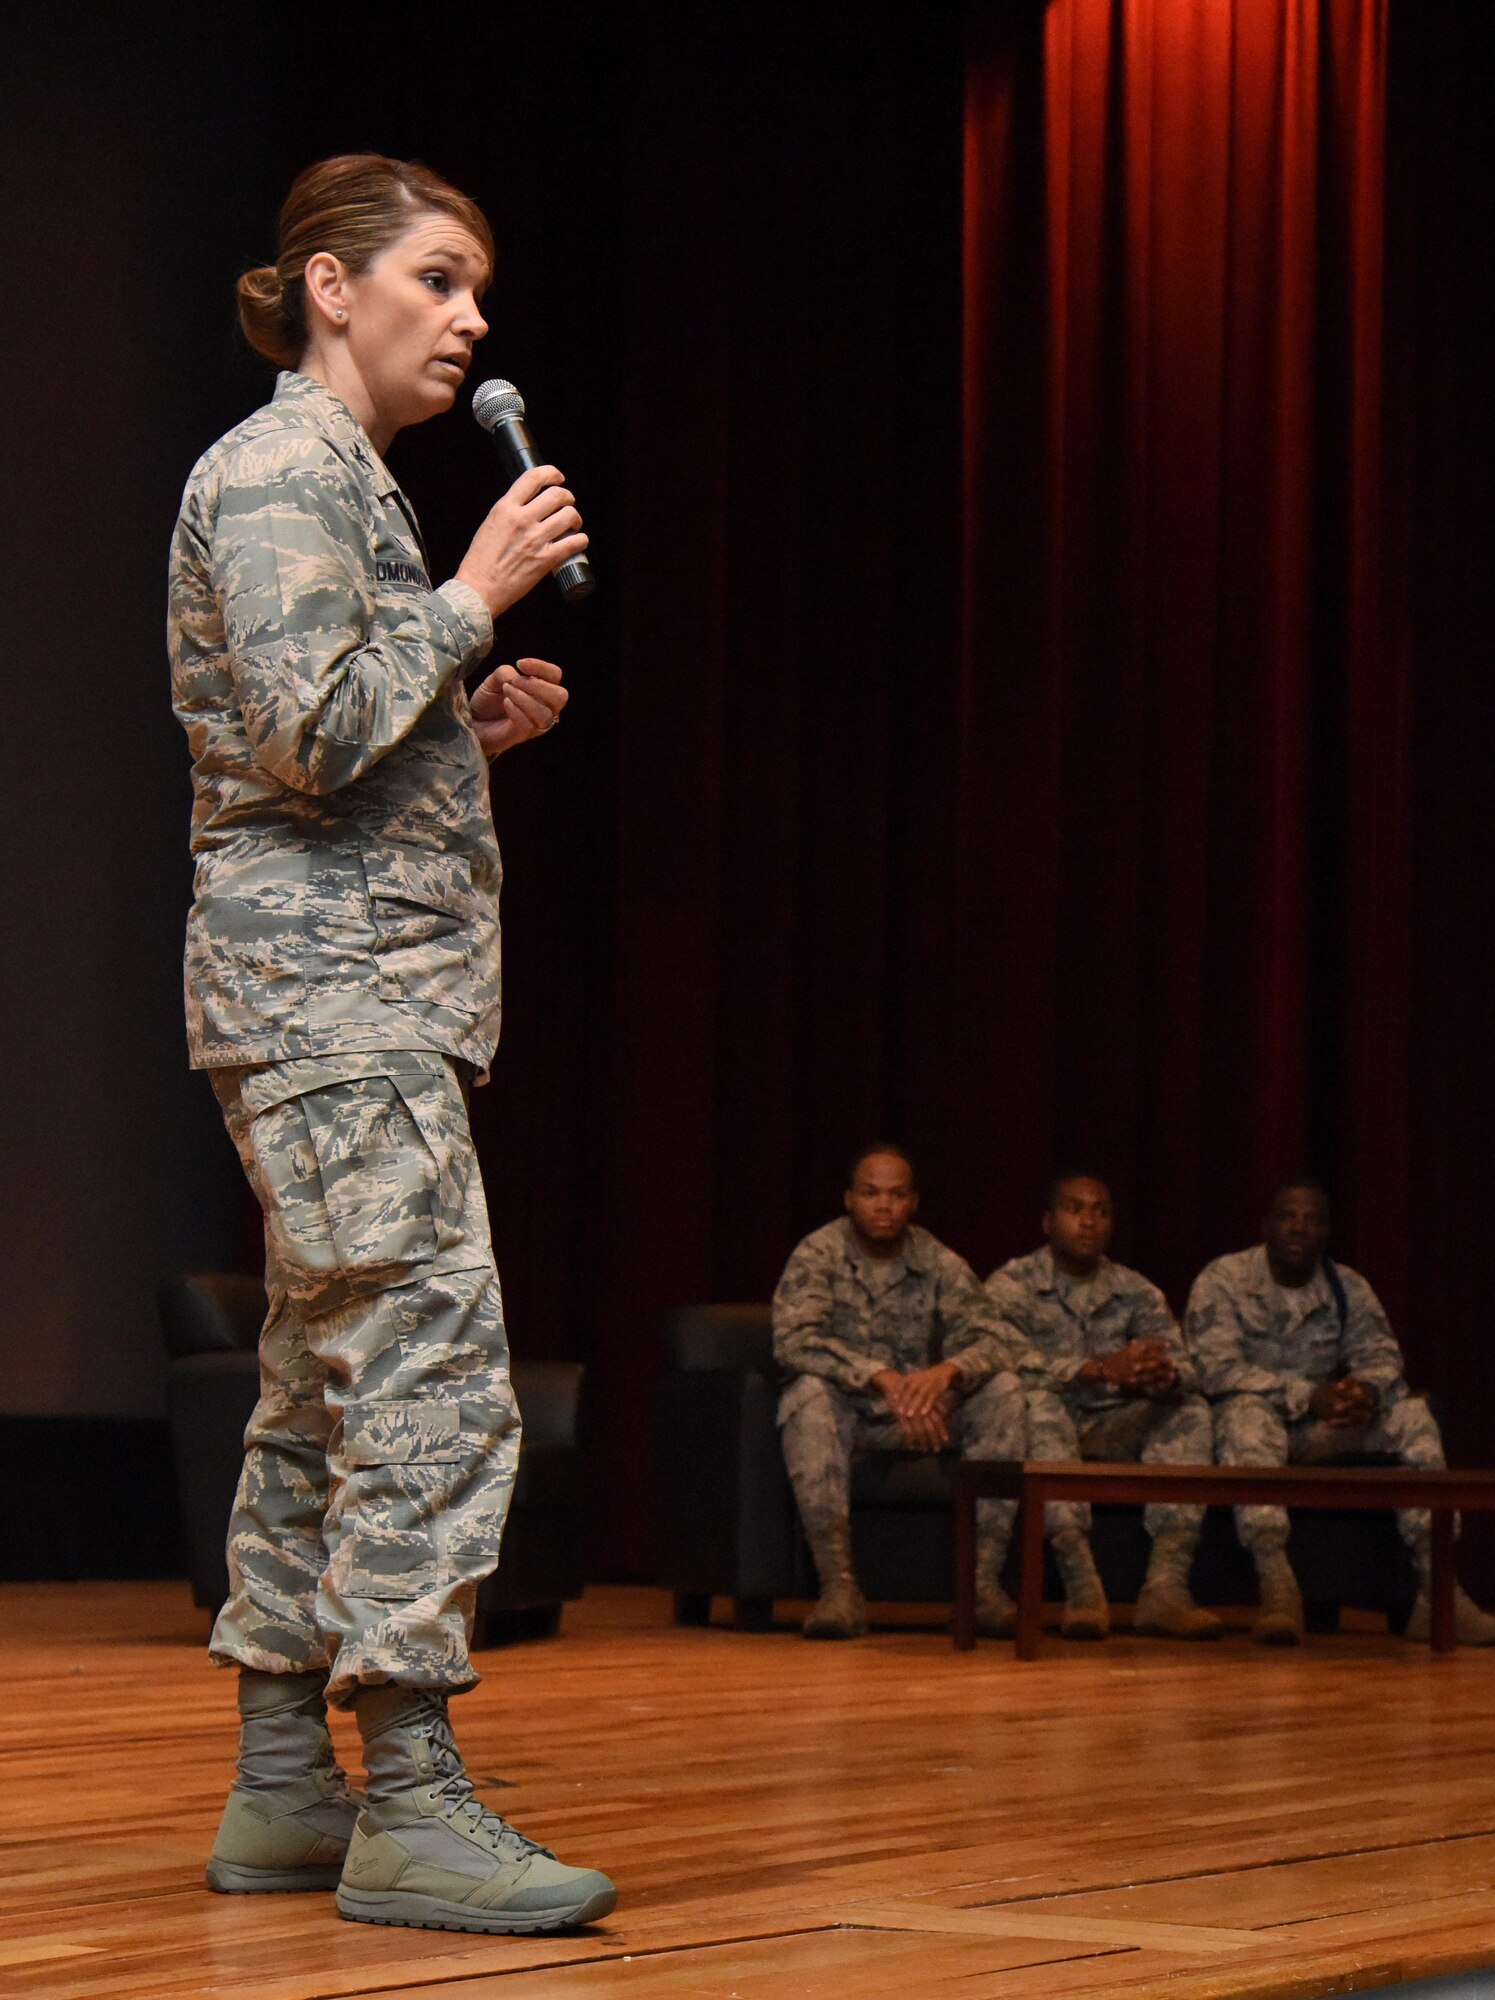 Col. Michele Edmondson, 81st Training Wing commander, delivers remarks during a storytellers event at the Welch Theater Nov. 16, 2016, on Keesler Air Force Base, Miss. The event, consisting of three speakers who shared their stories about resiliency, was one of several events held throughout Dragon Week, which focuses on resiliency and teambuilding initiatives across the base. (U.S. Air Force photo by Kemberly Groue/Released)